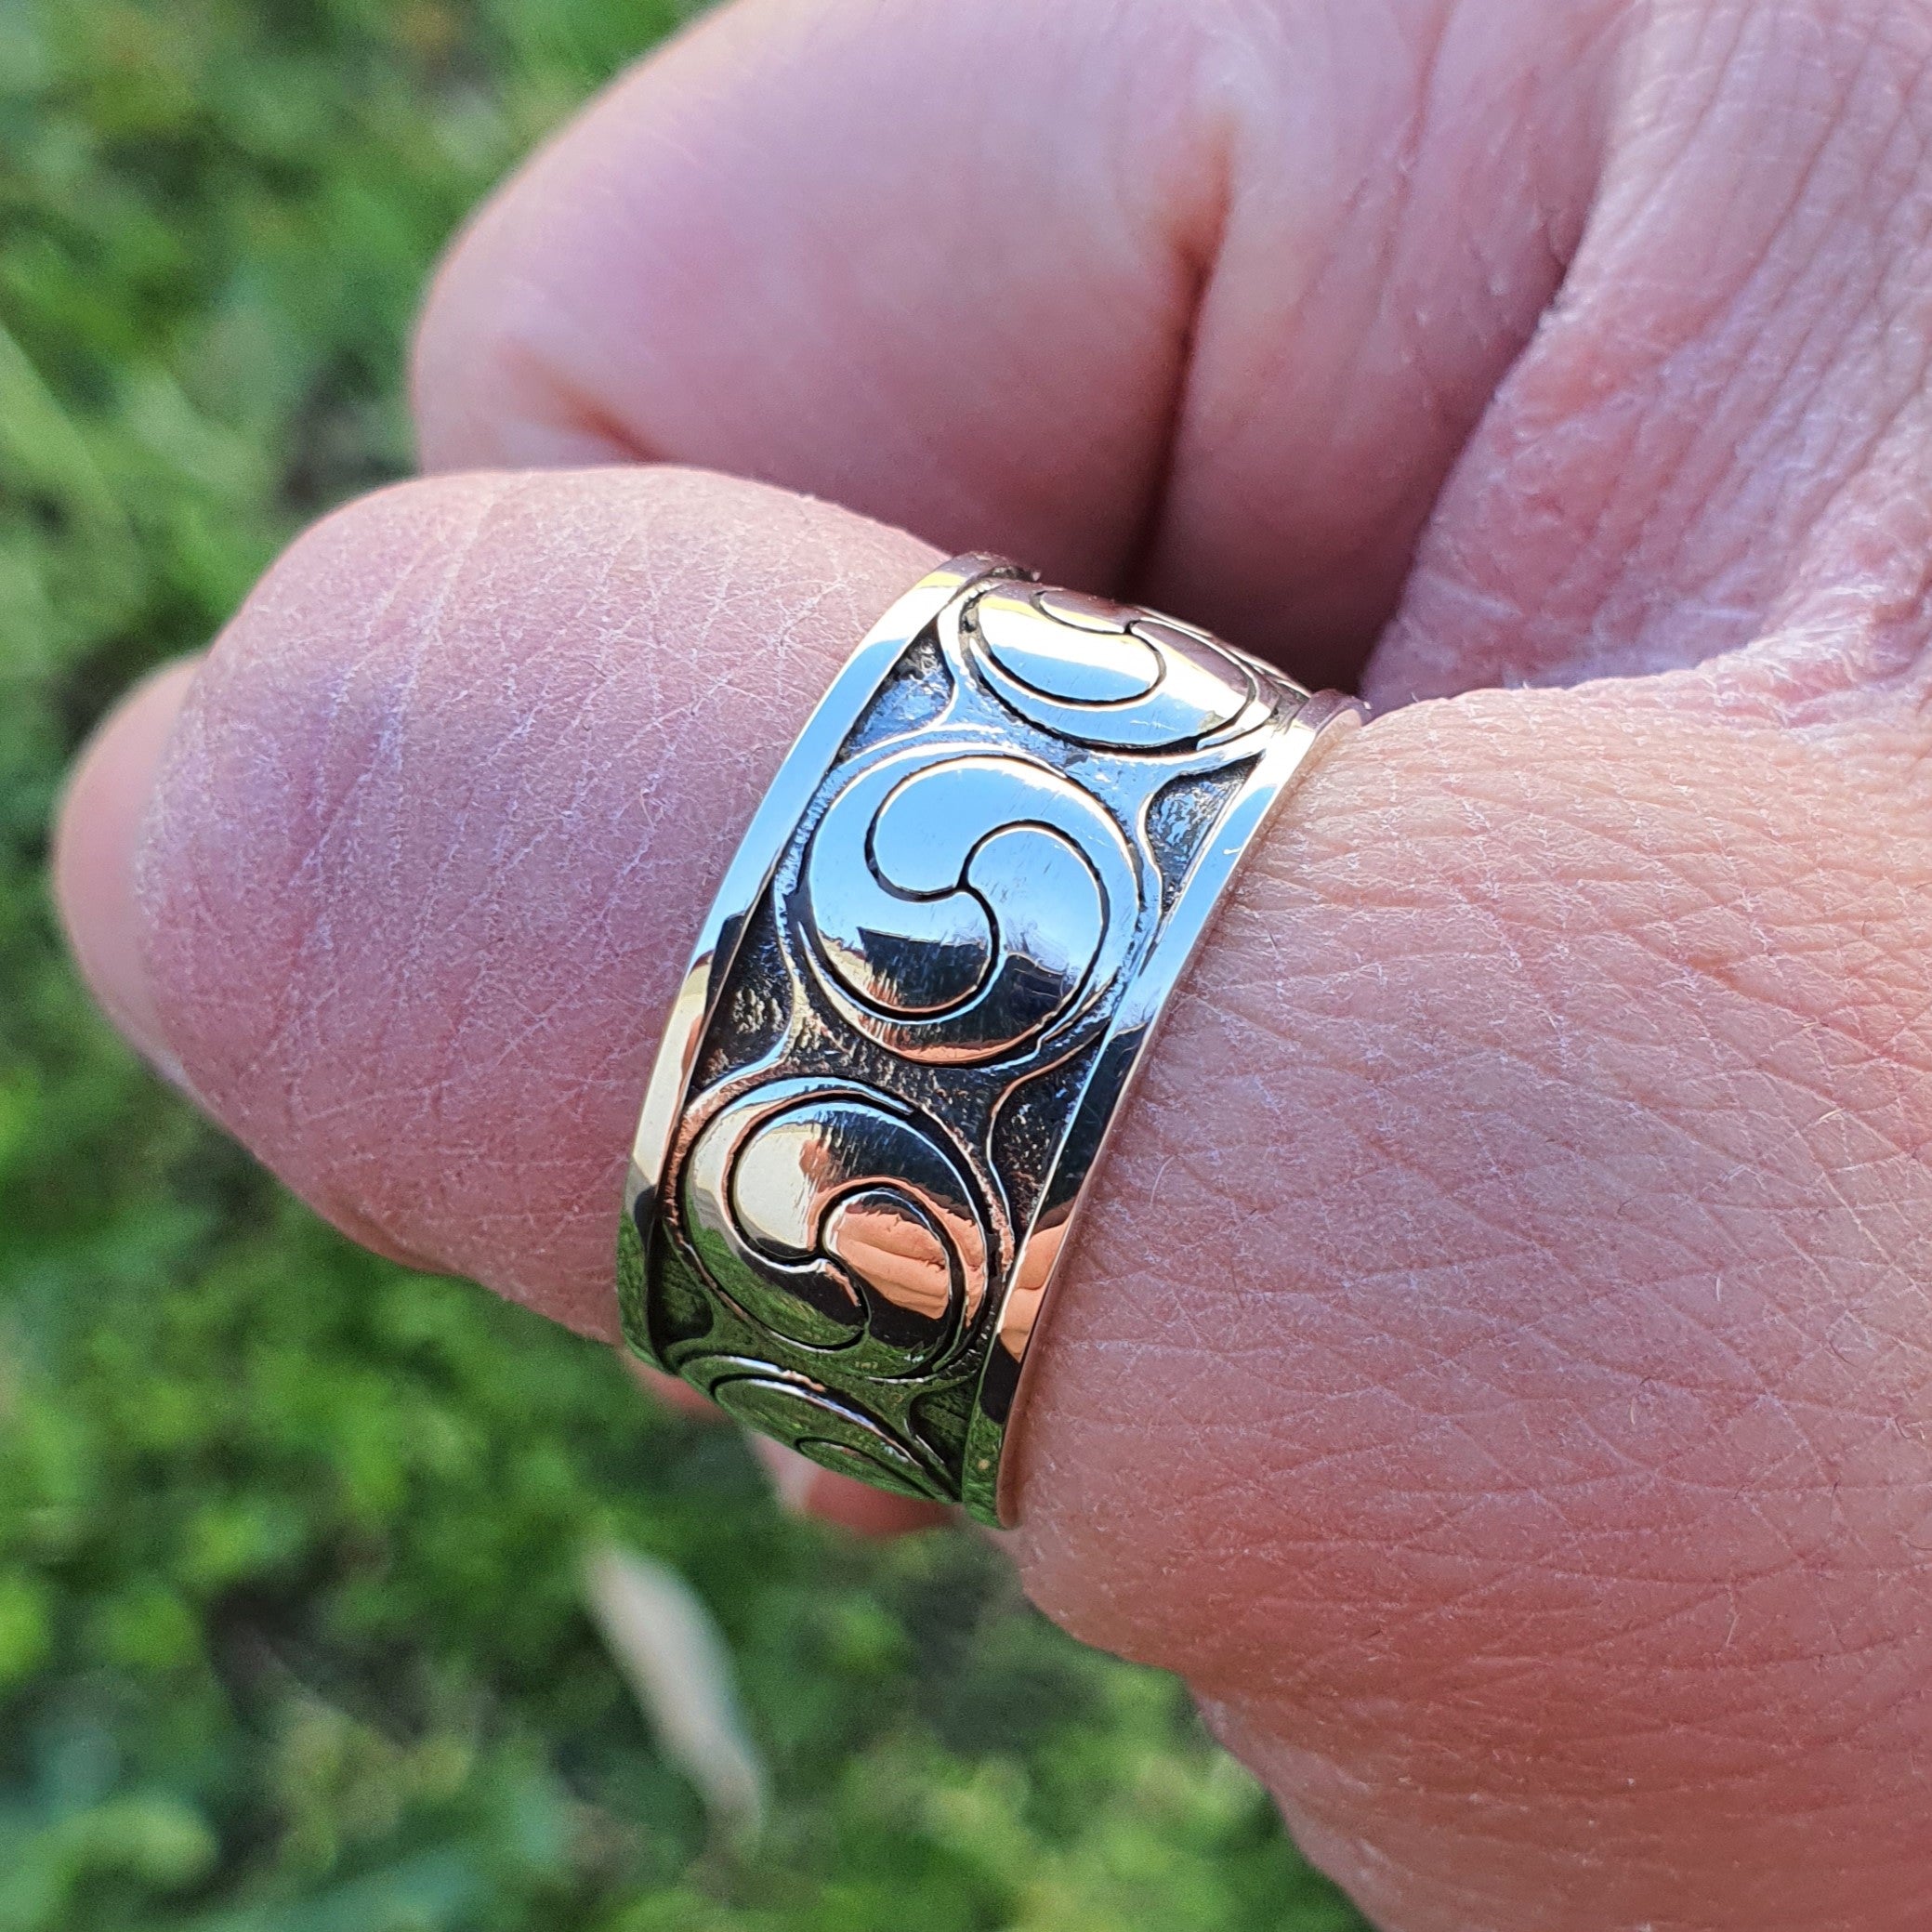 Sterling silver manufactured using wax casting, polished for a slightly textured, mild sheen surface, and recessed details blackened for a steampunk look.